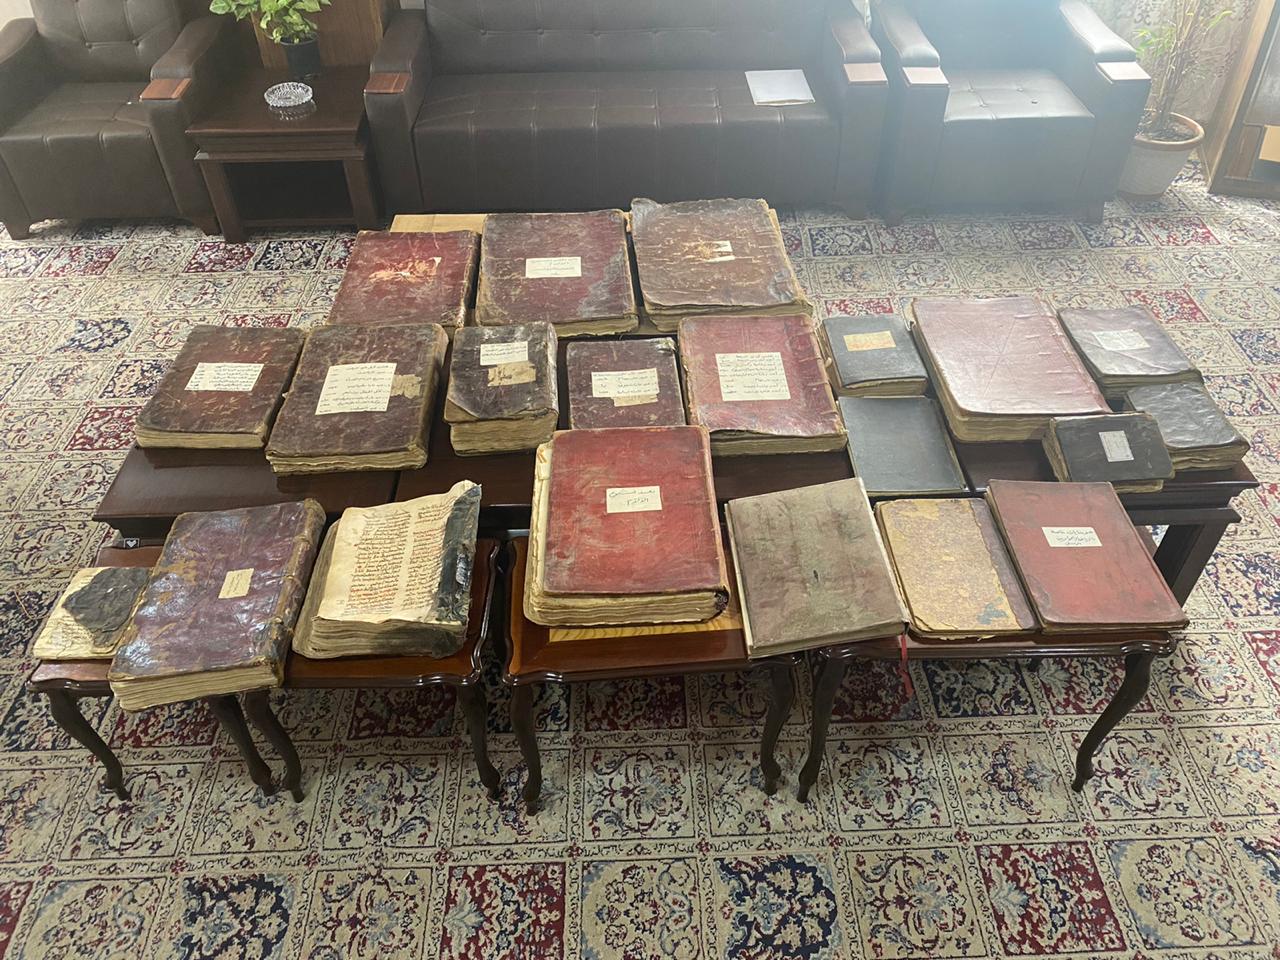 Terrorist who stole over 32 old Christian books arrested in Nineveh